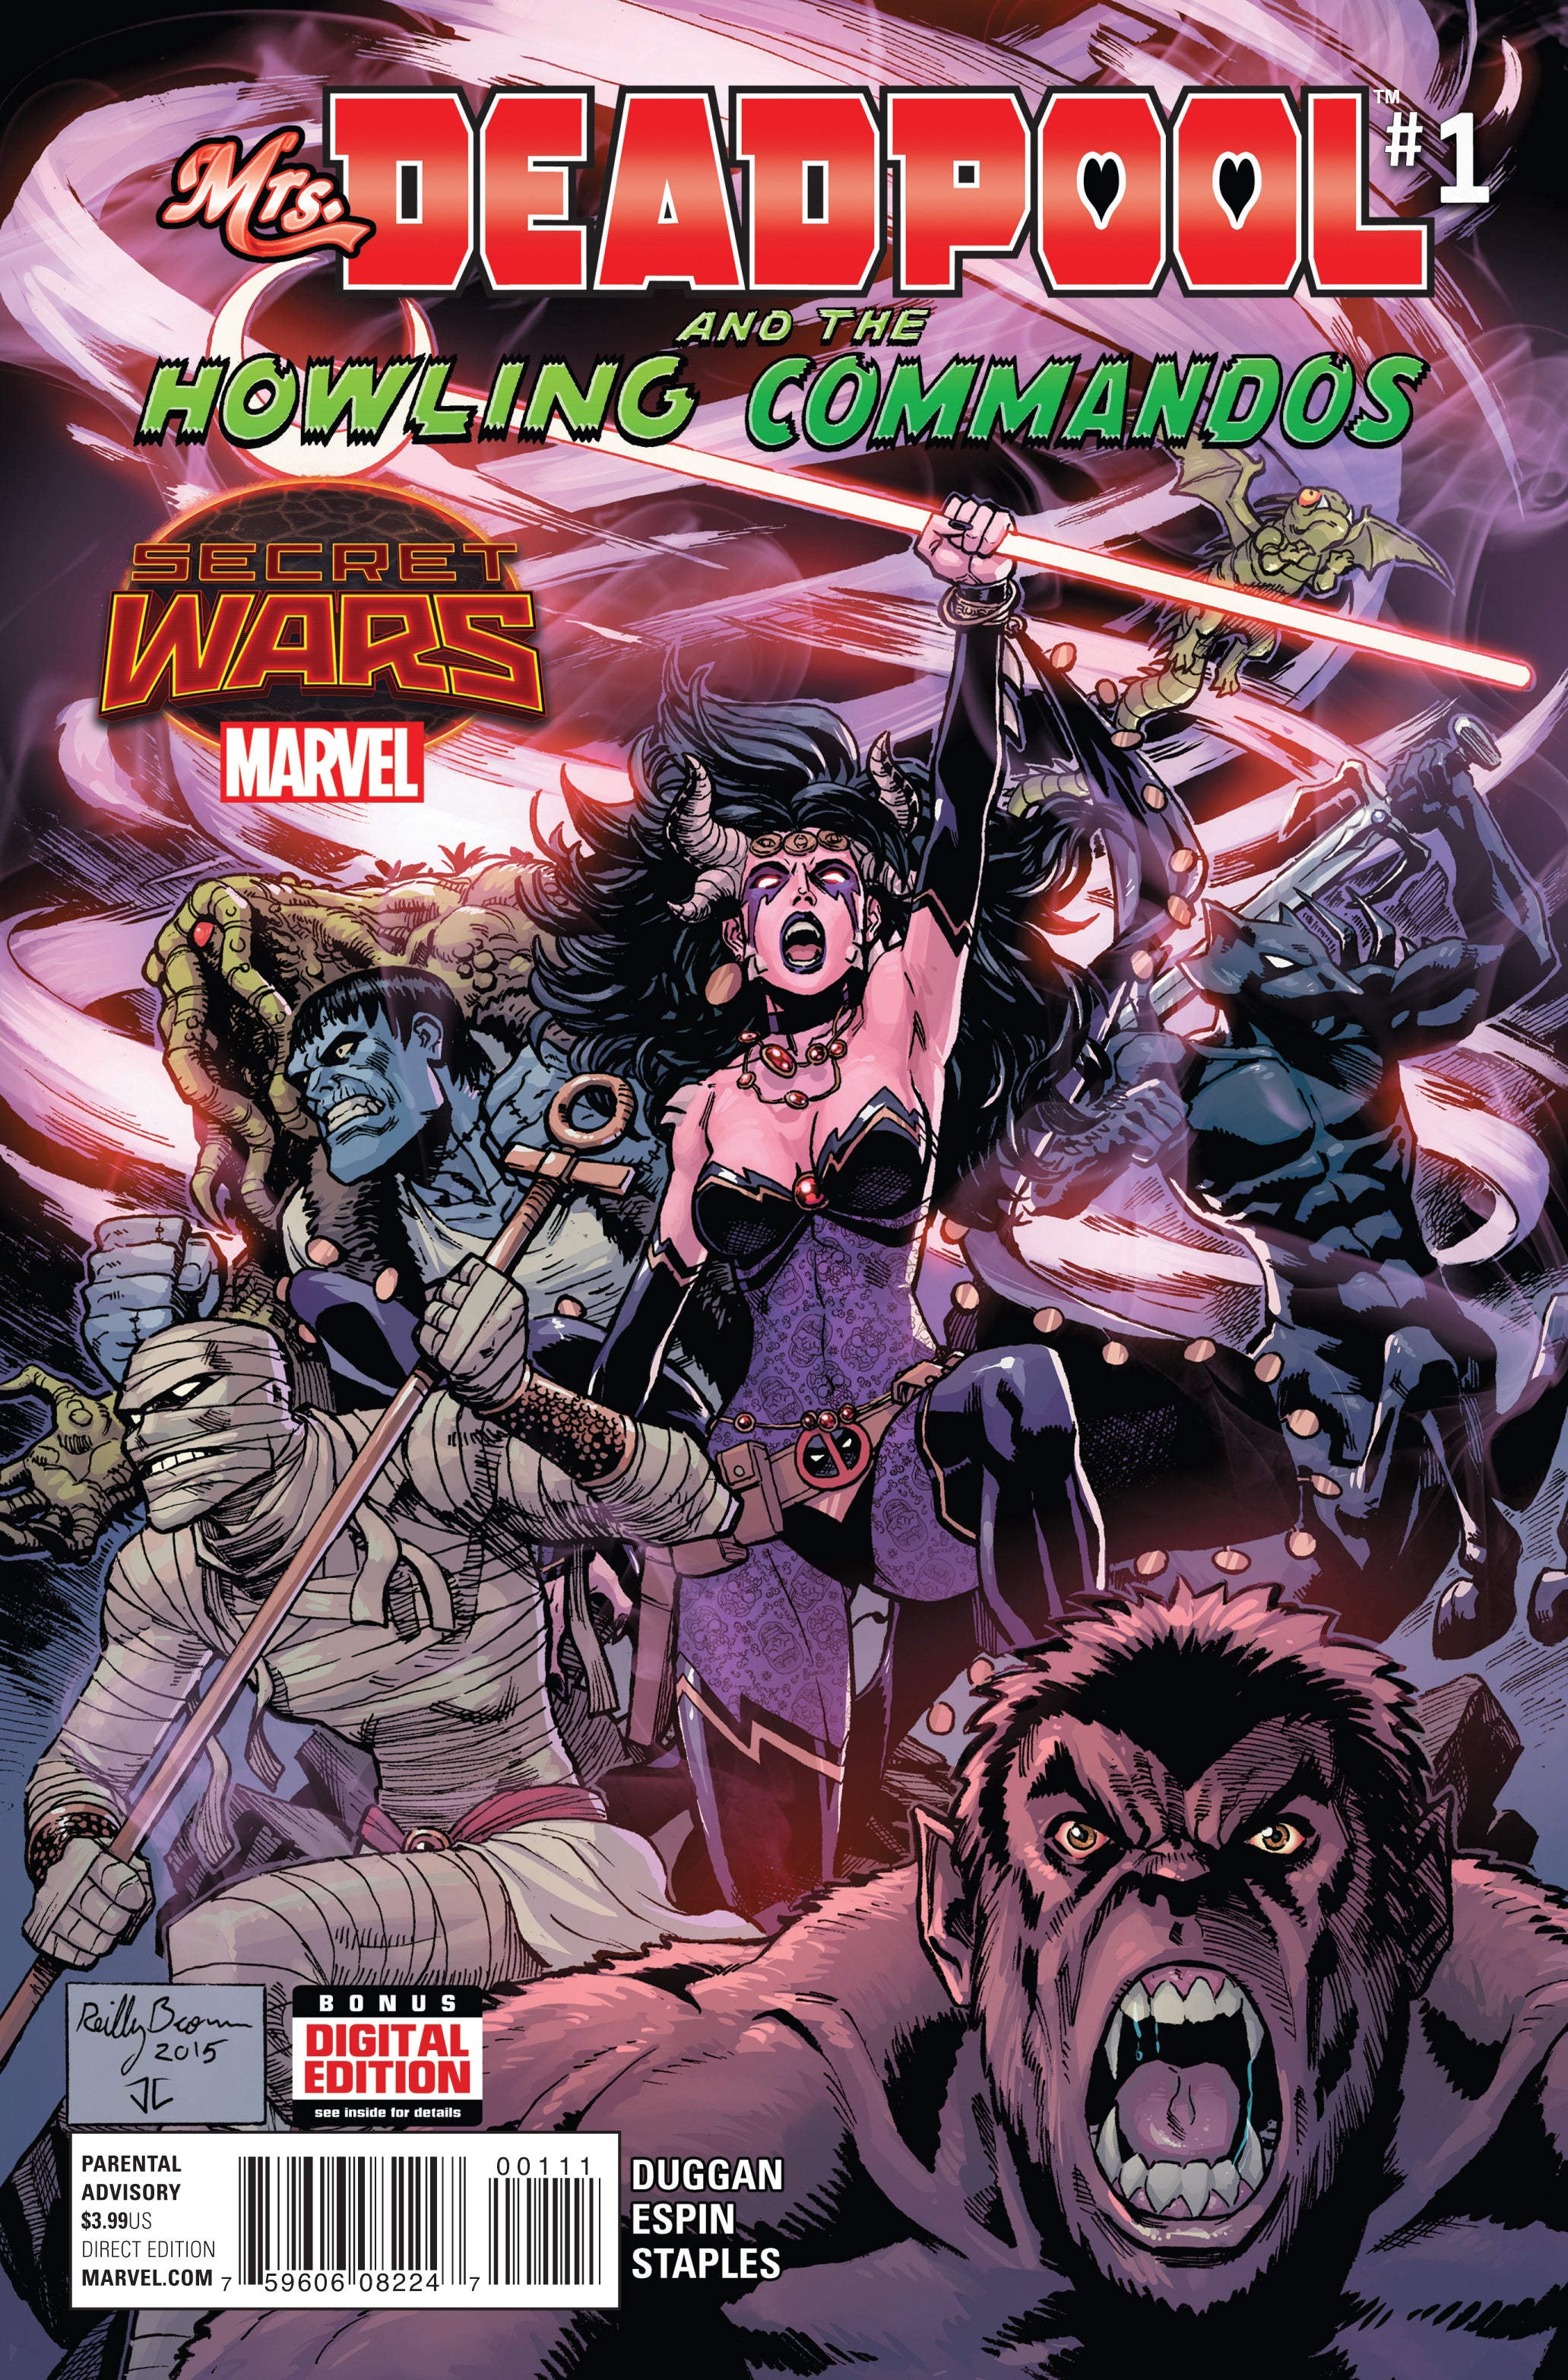 MRS DEADPOOL AND HOWLING COMMANDOS #1 to #3 | Game Master's Emporium (The New GME)